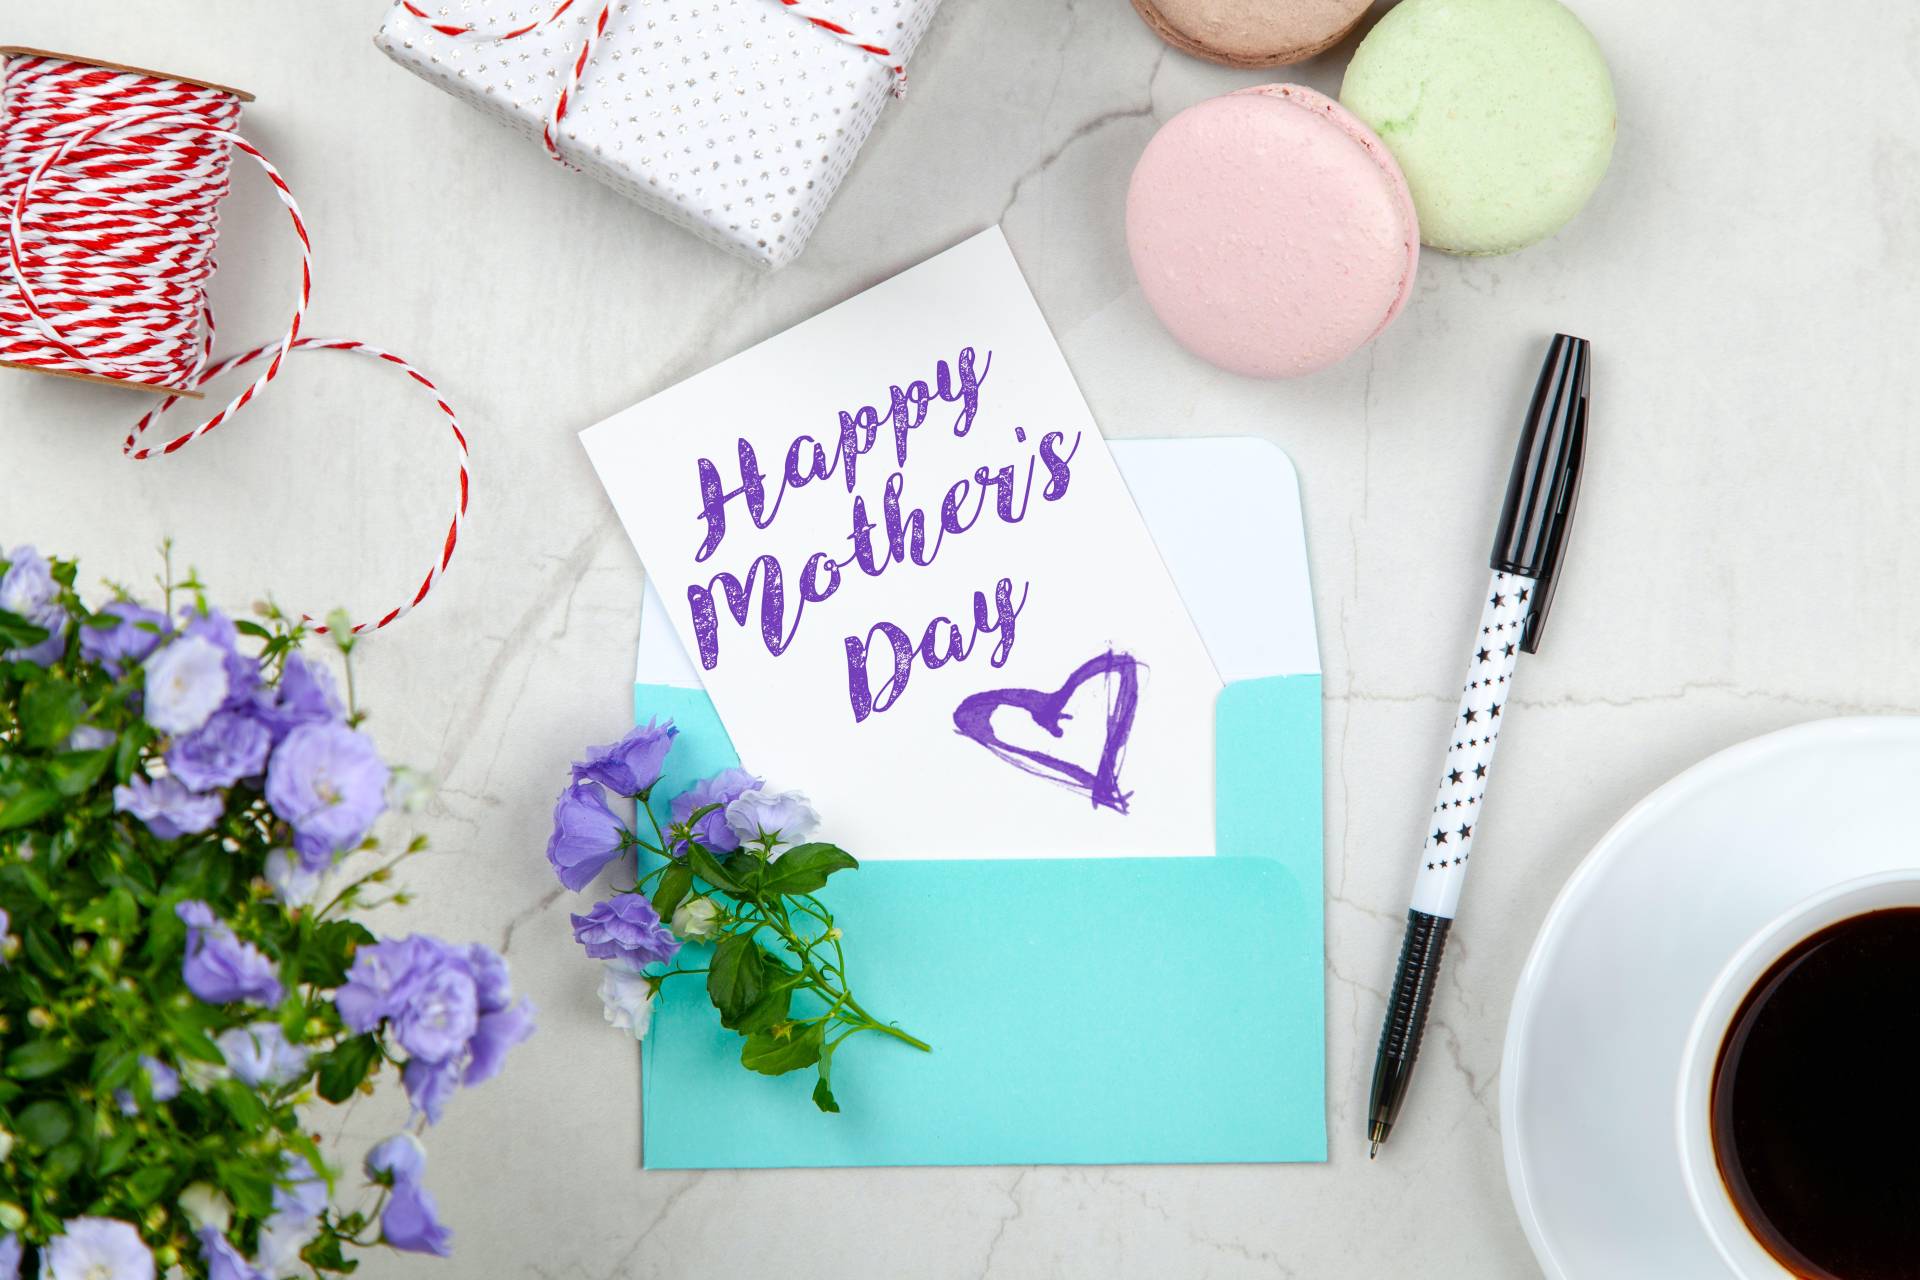 9 Practical Mothers Day Gifts for Working Mom